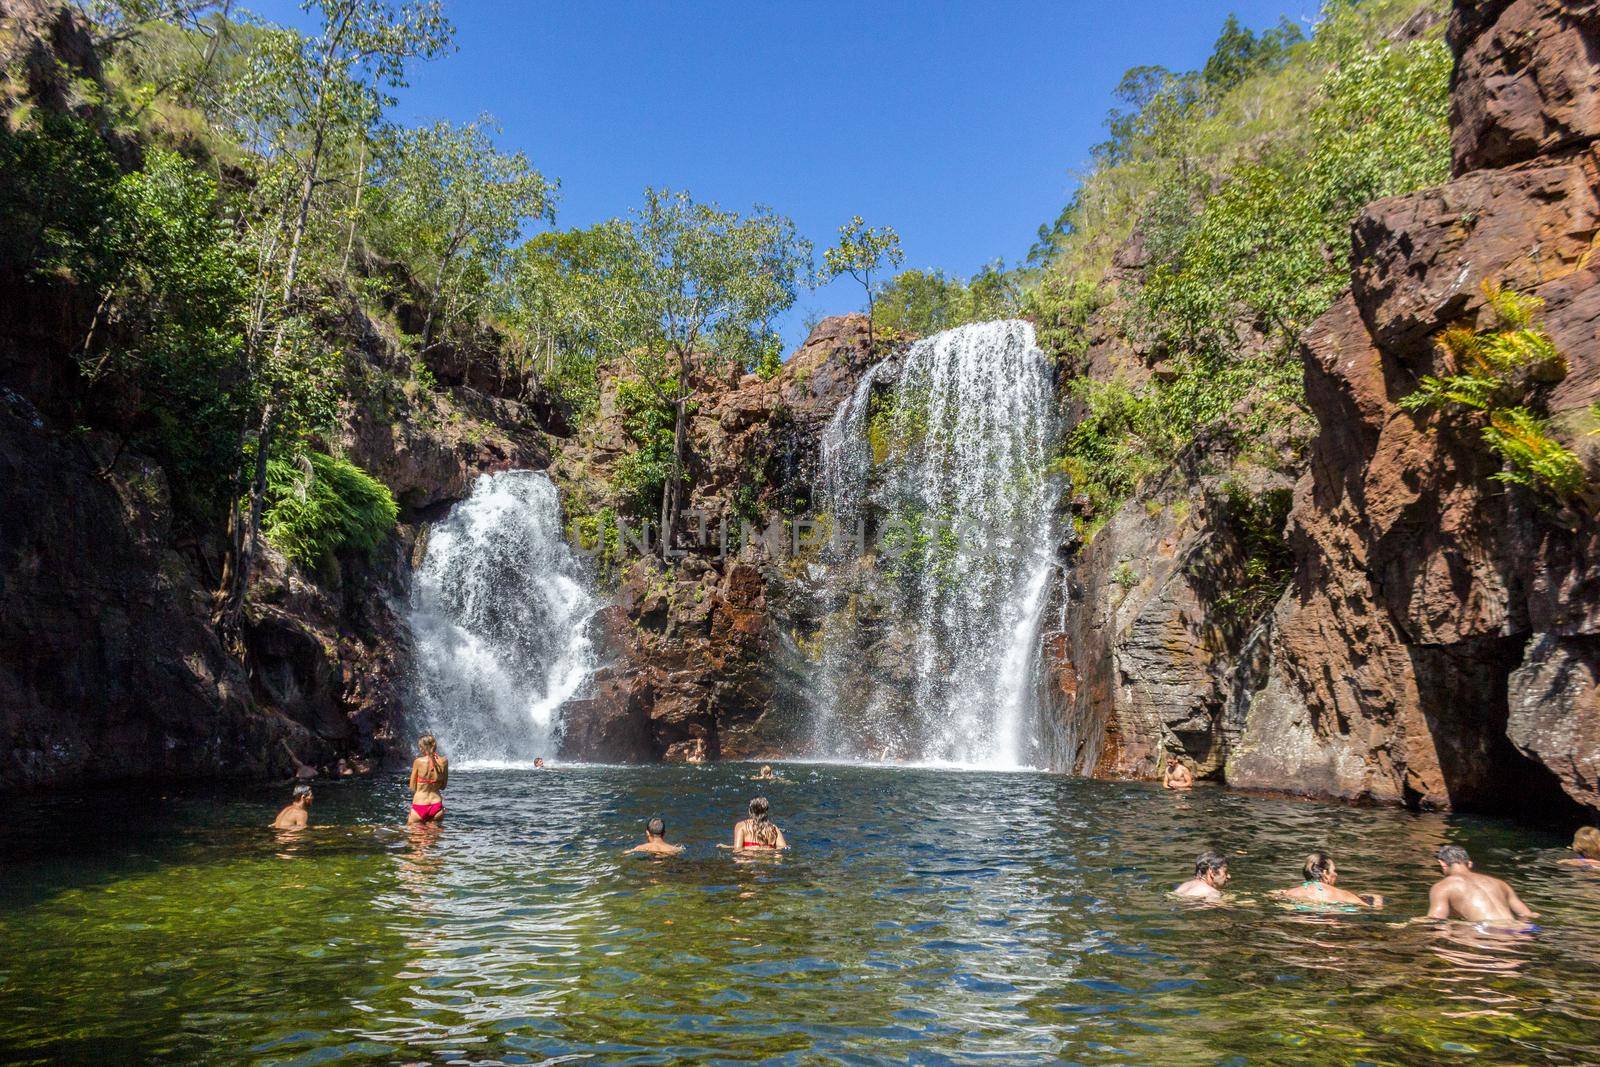 Litchfield National Park, Northern Territory, Australia - Jun 12 2013: Tourists and residents of Darwin enjoy refreshing swim at Florence Falls, very popular desitination for tourists and locals alike